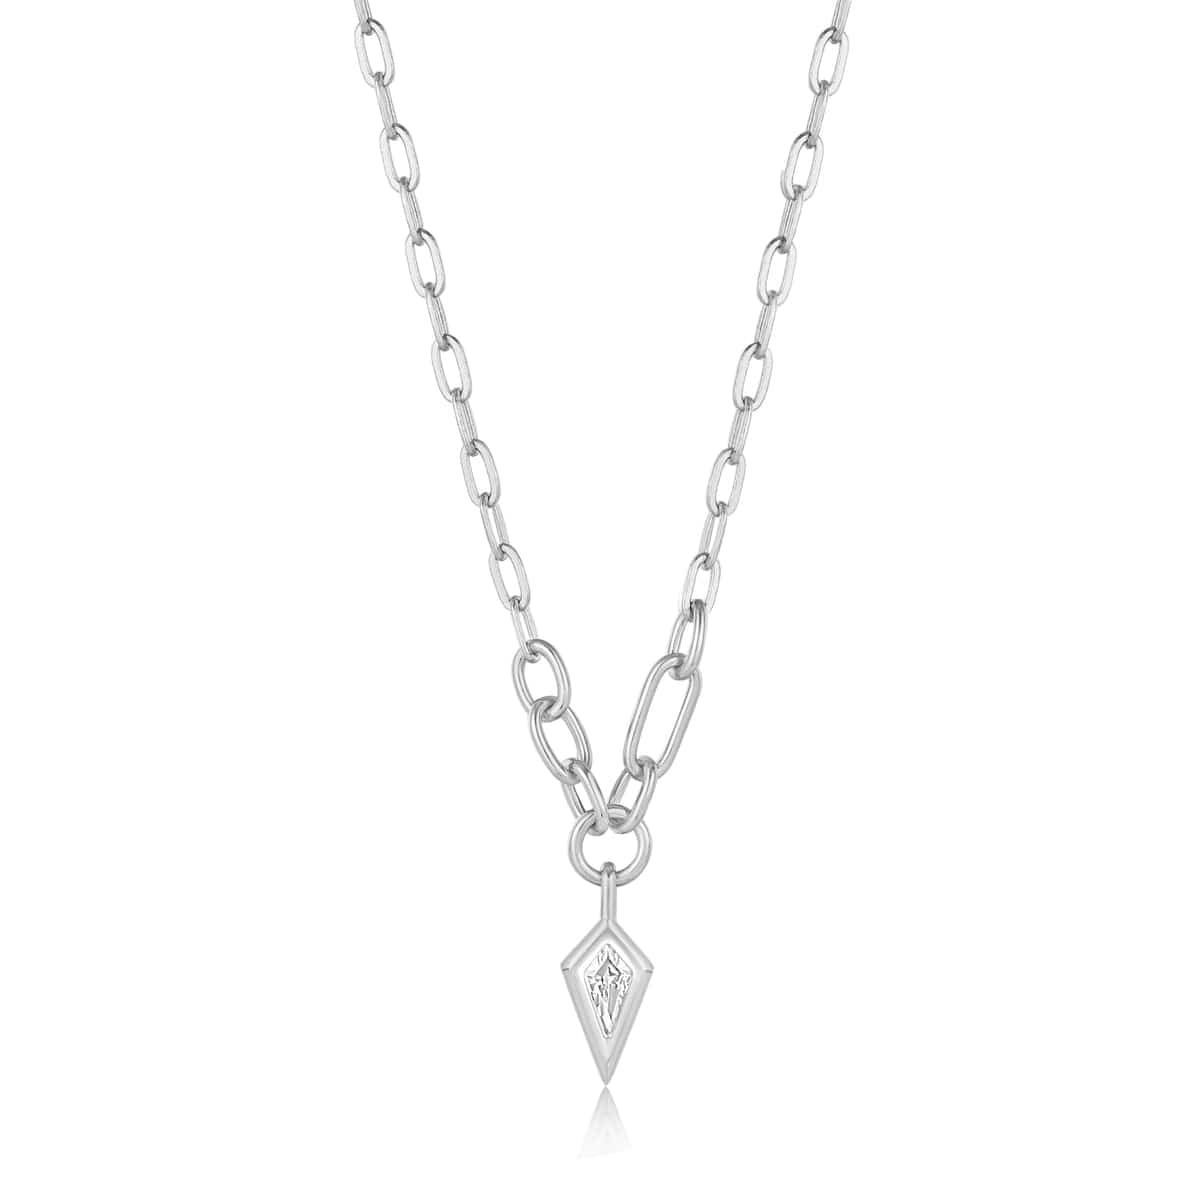 Sener Besim | Long Box Chunky Chain Necklace - Silver | Necklaces